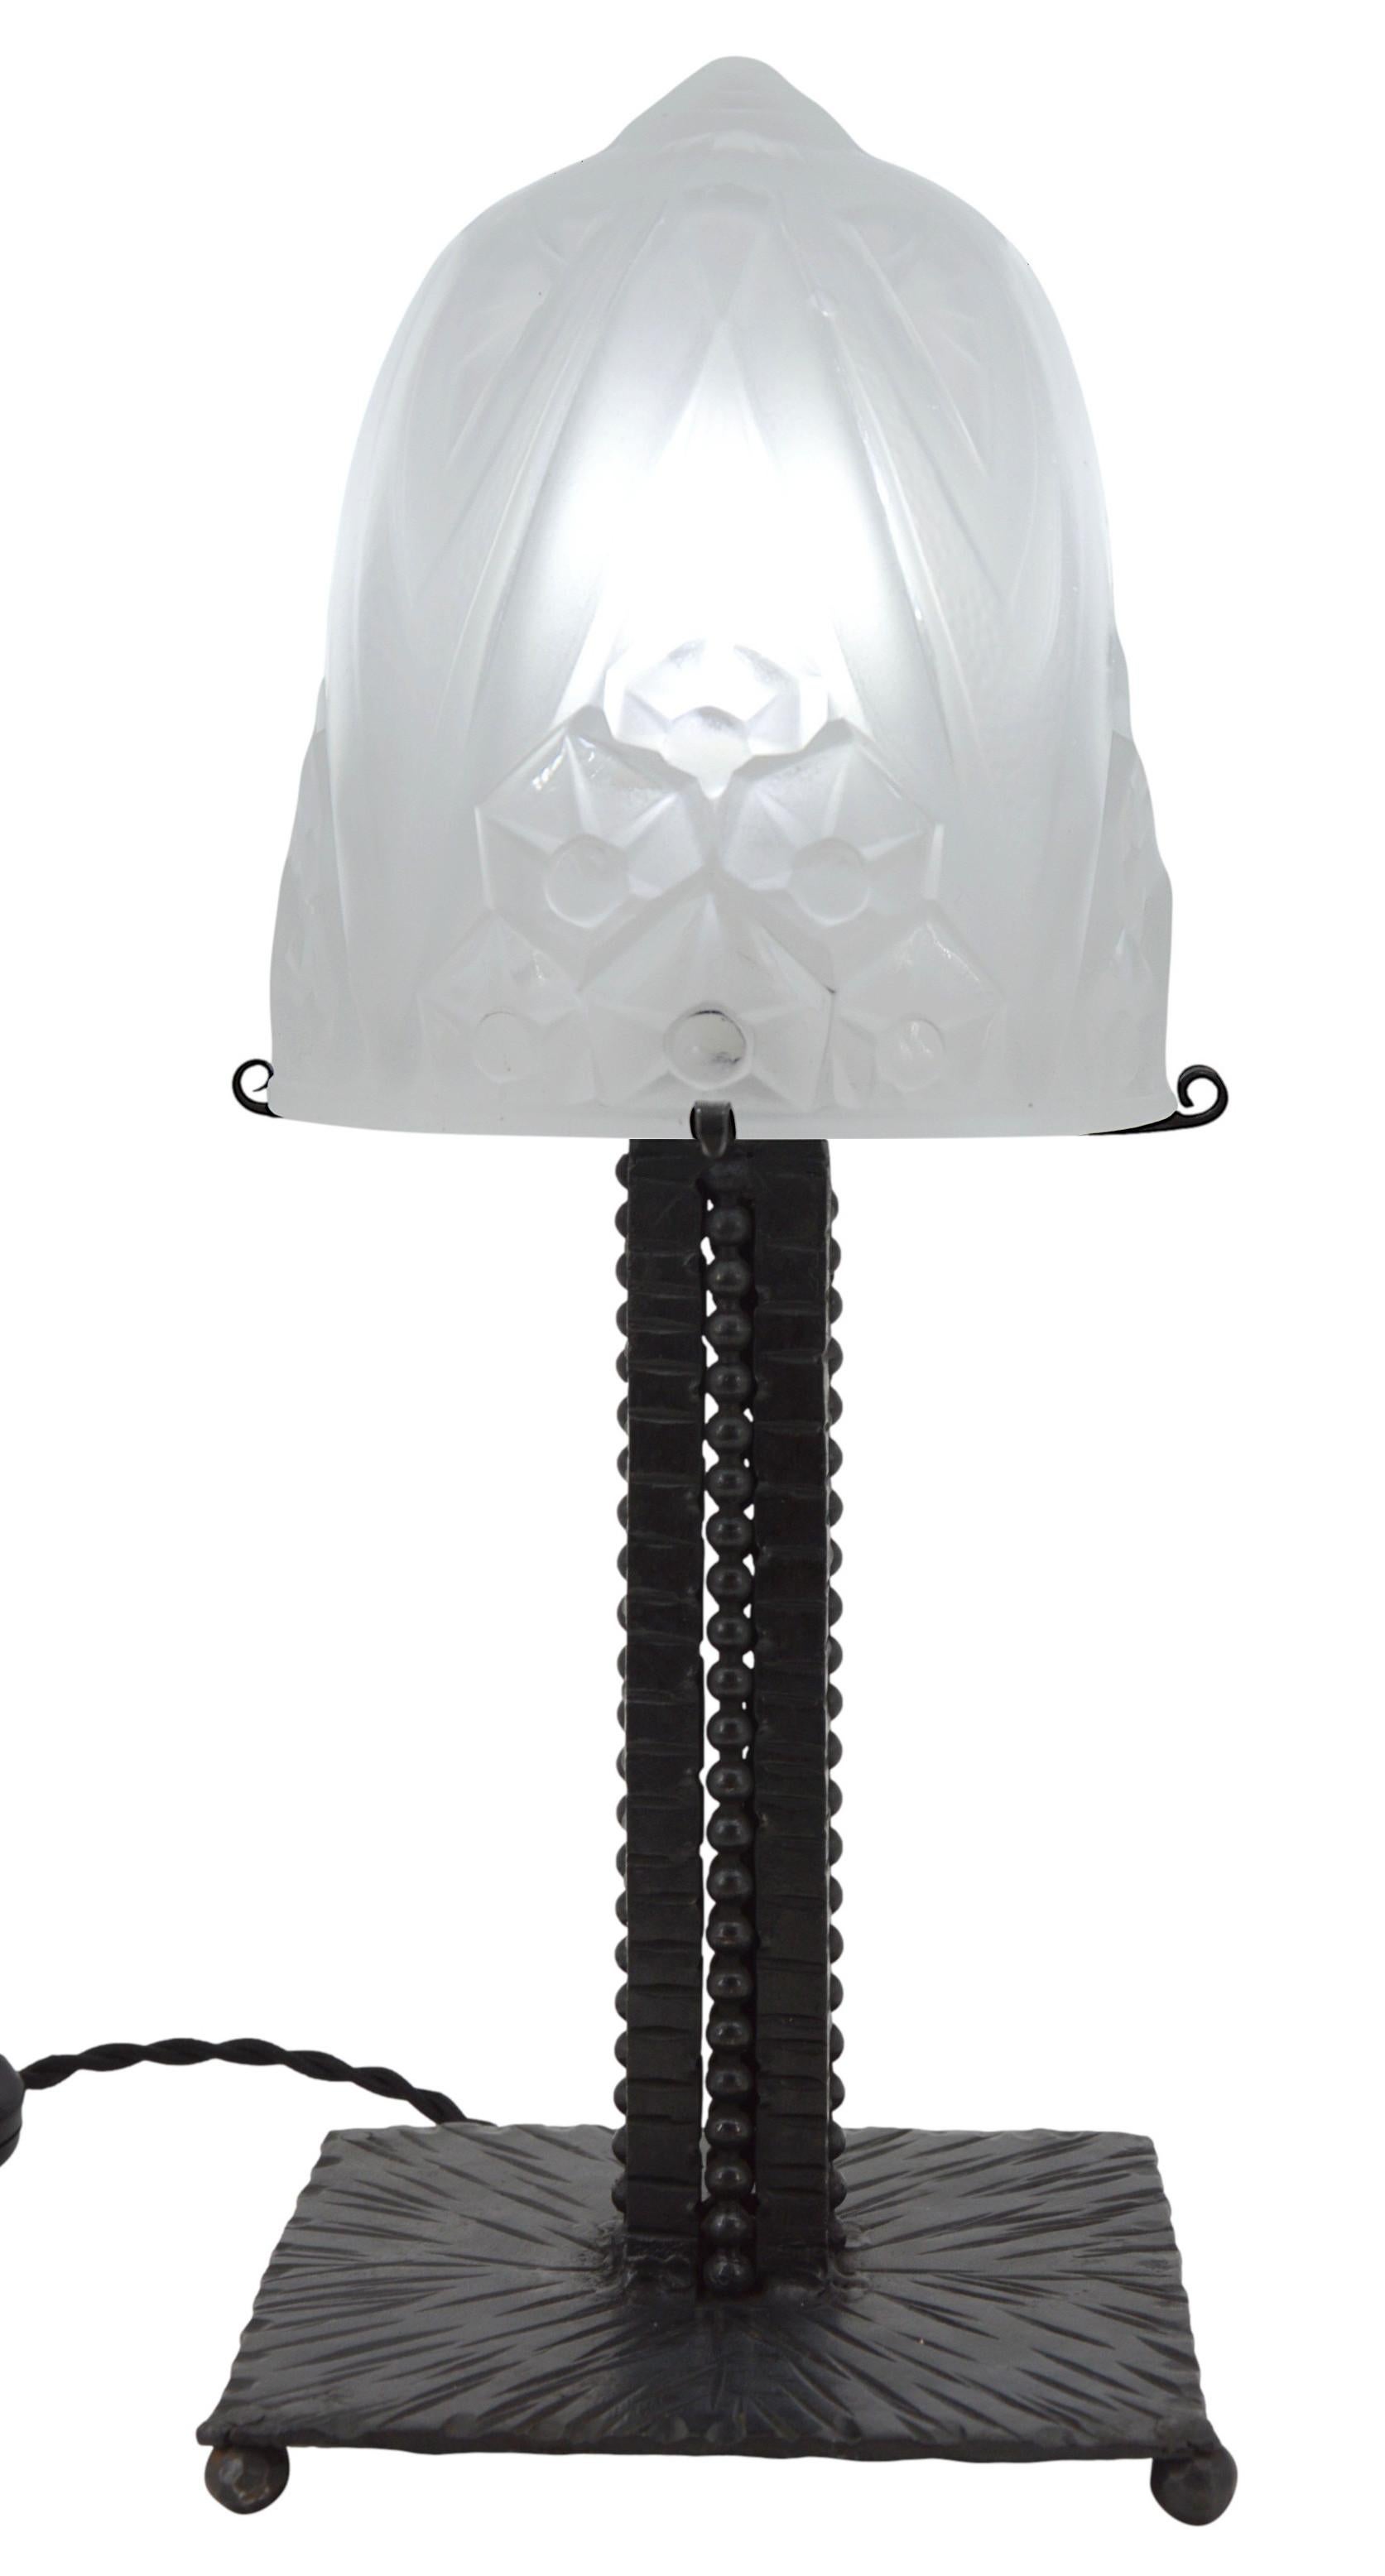 French Art Deco table lamp by MULLER FRERES, Luneville, France, 1920s. Frosted molded glass shade with a stylized flower decor on its wrought-iron base. Height : 13